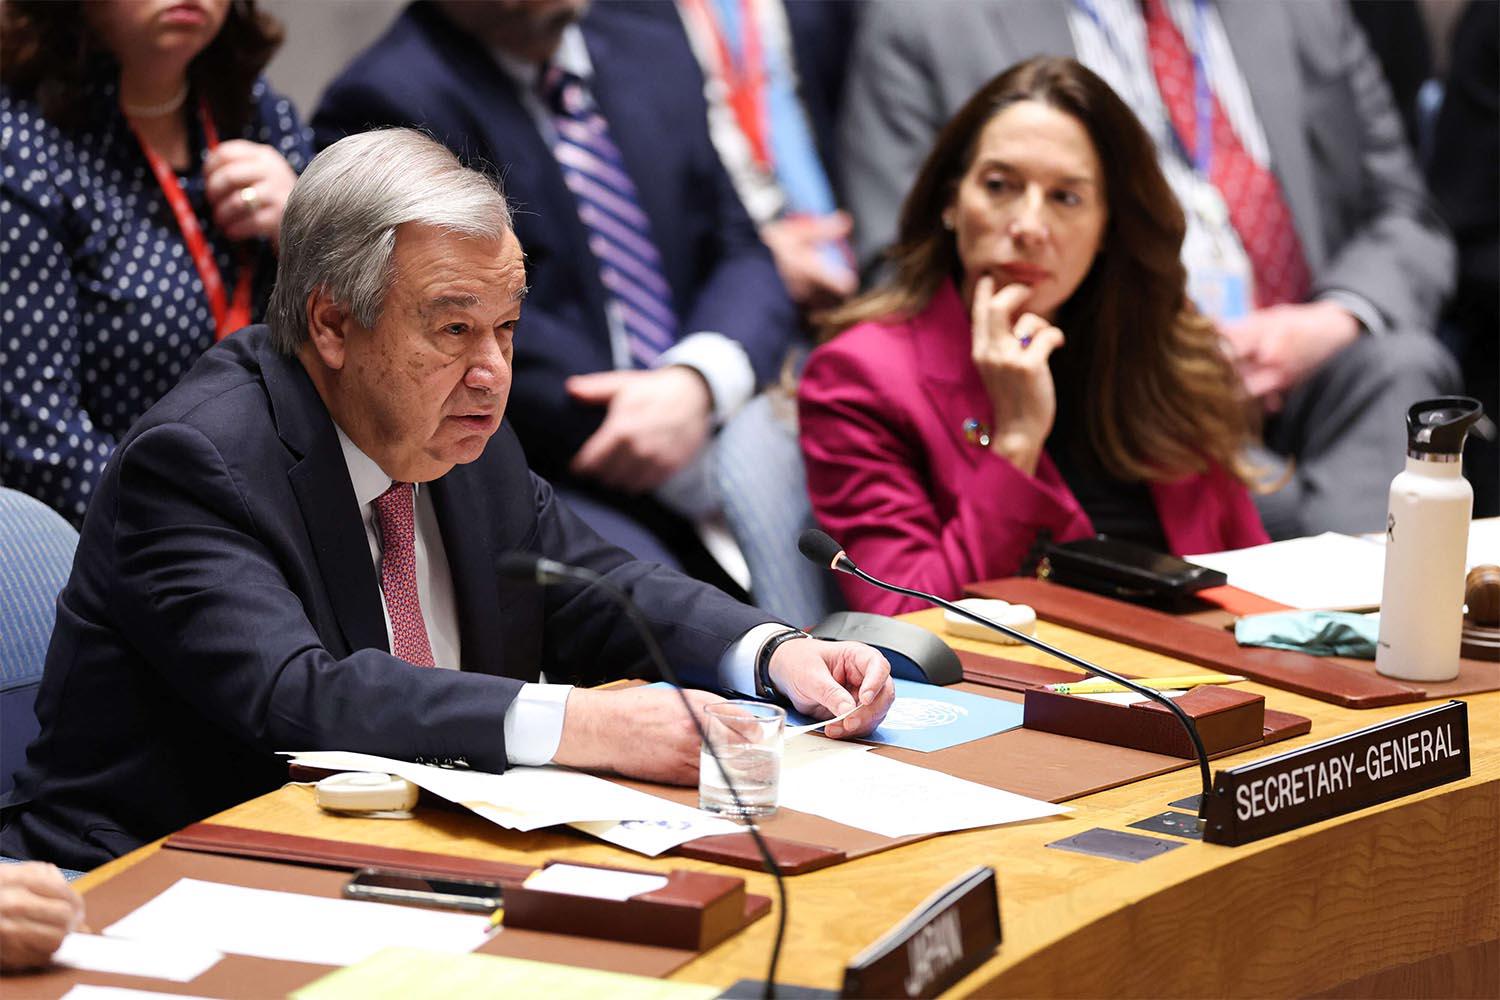 Guterres told member states that the UN charter bars the use of force against the territorial integrity or political independence of any state 